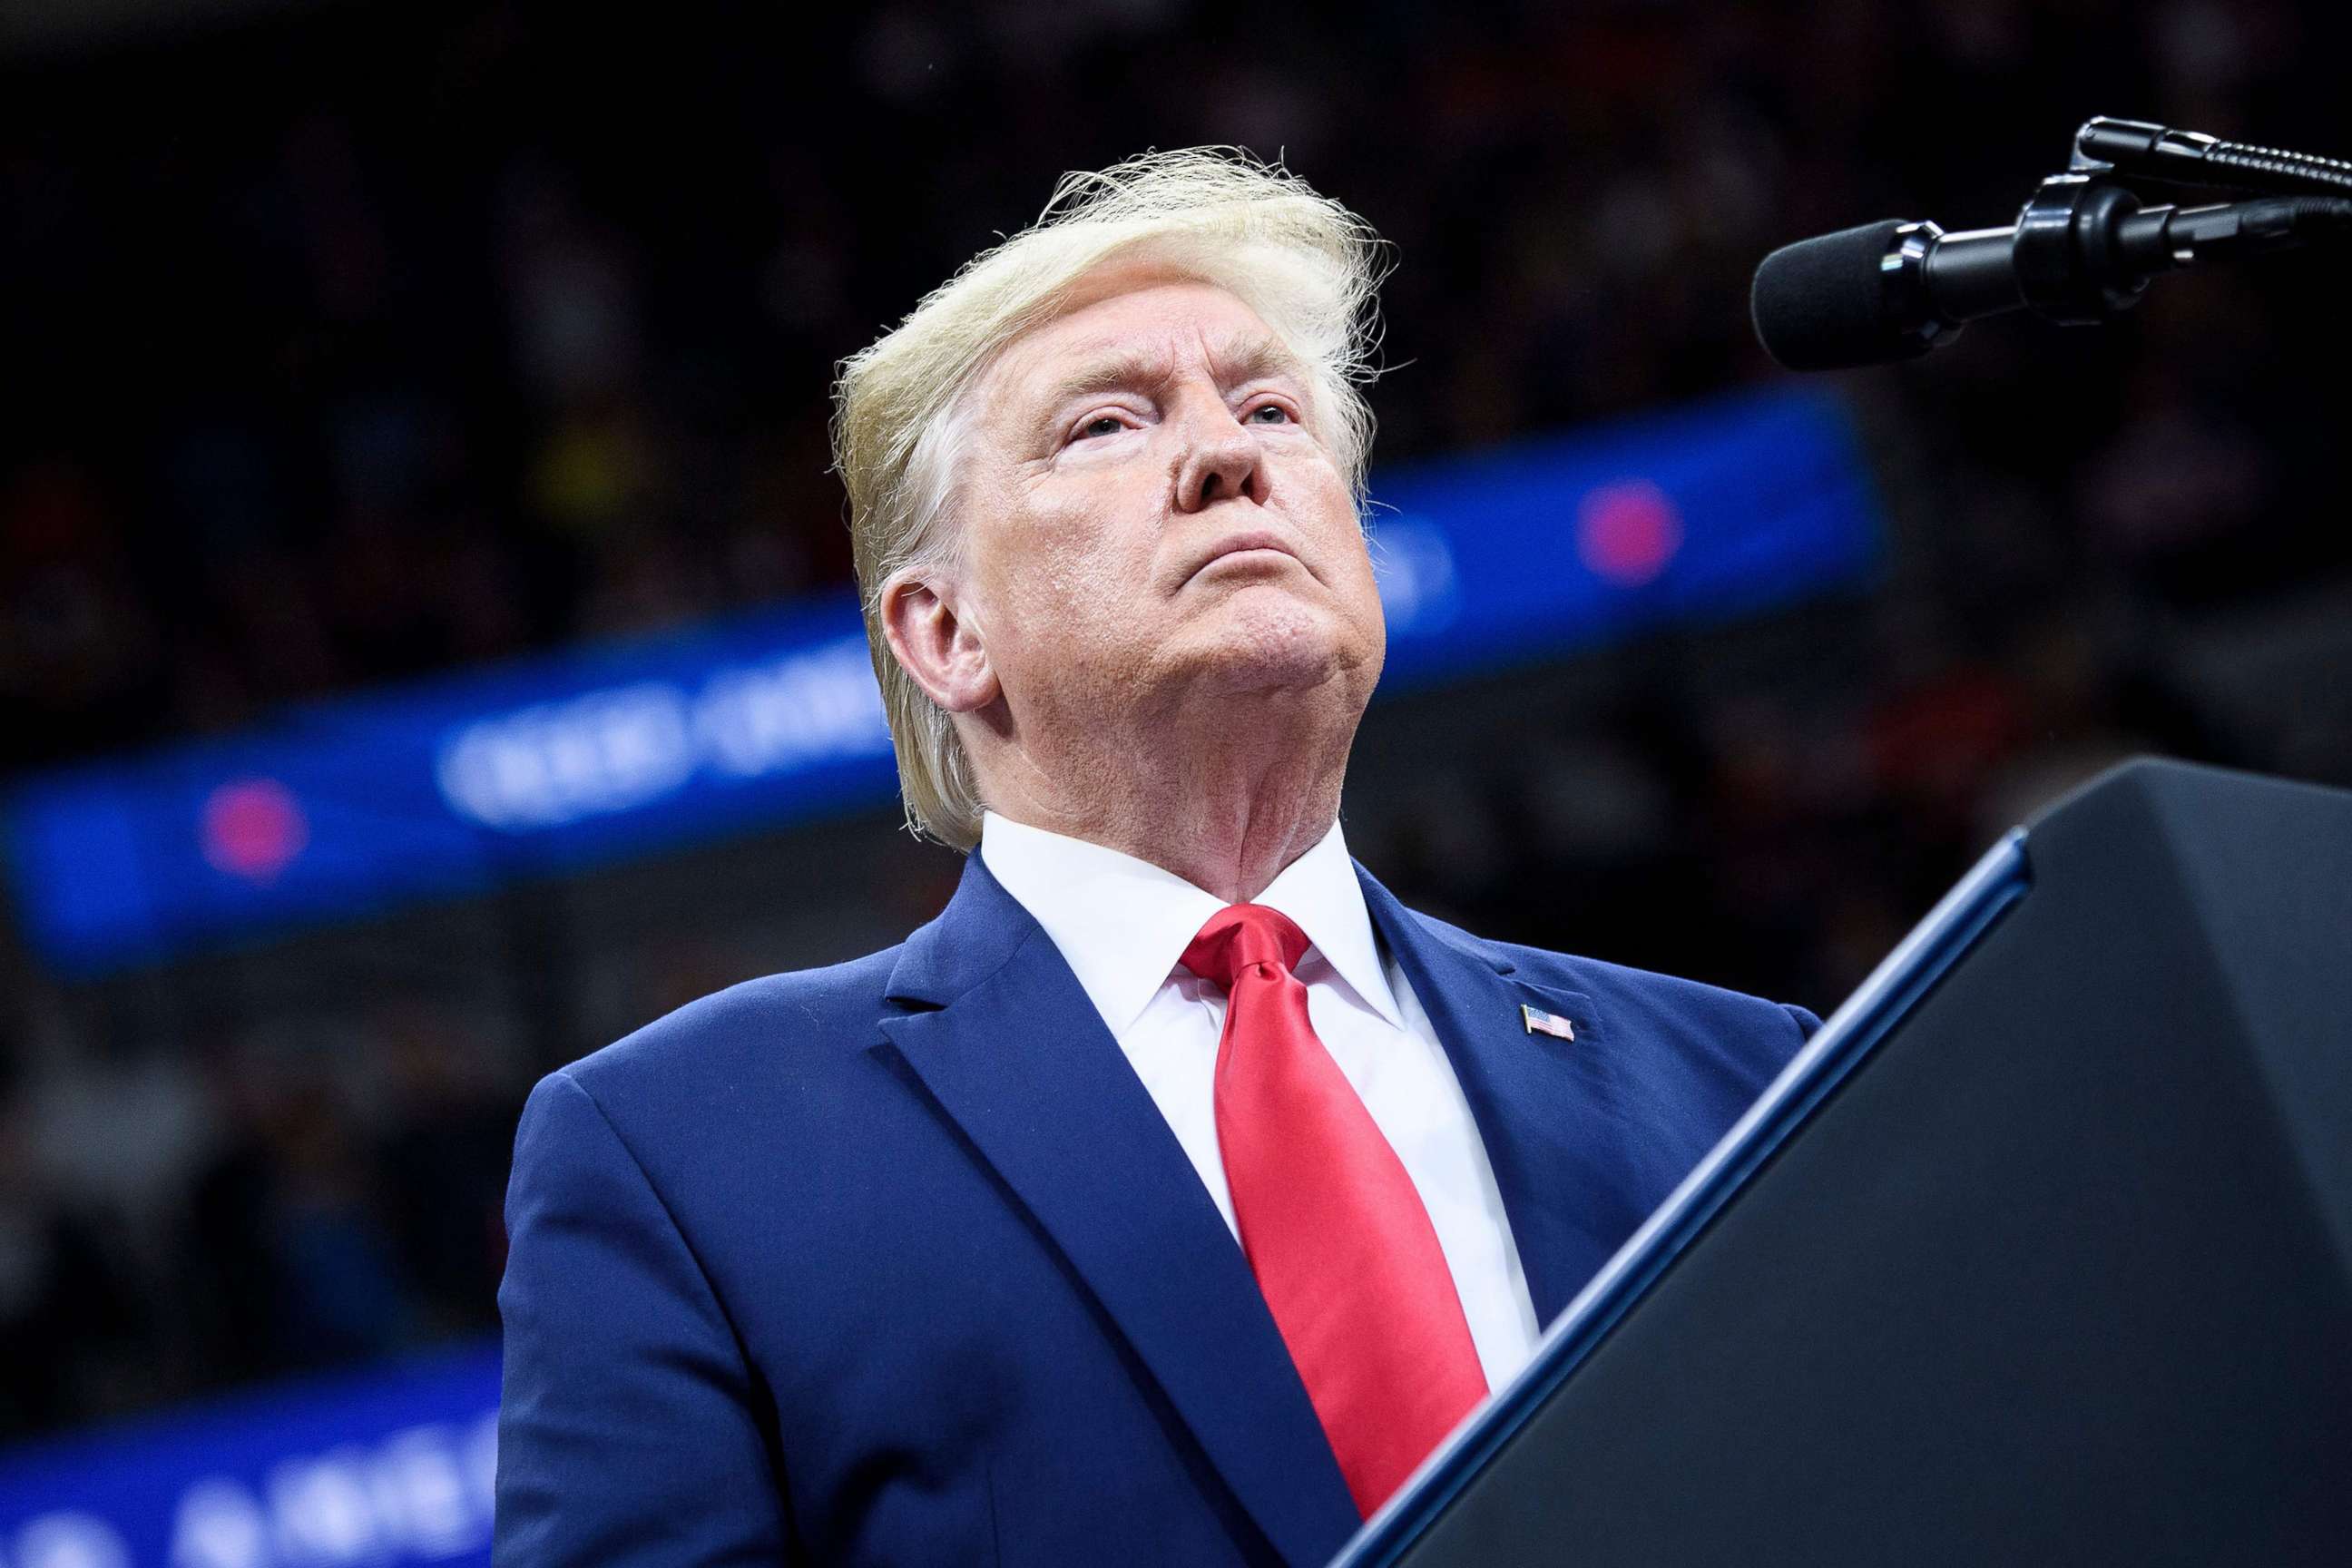 PHOTO: President Donald Trump speaks during a "Keep America Great" rally at the Target Center in Minneapolis, Minn. on Oct. 10, 2019.